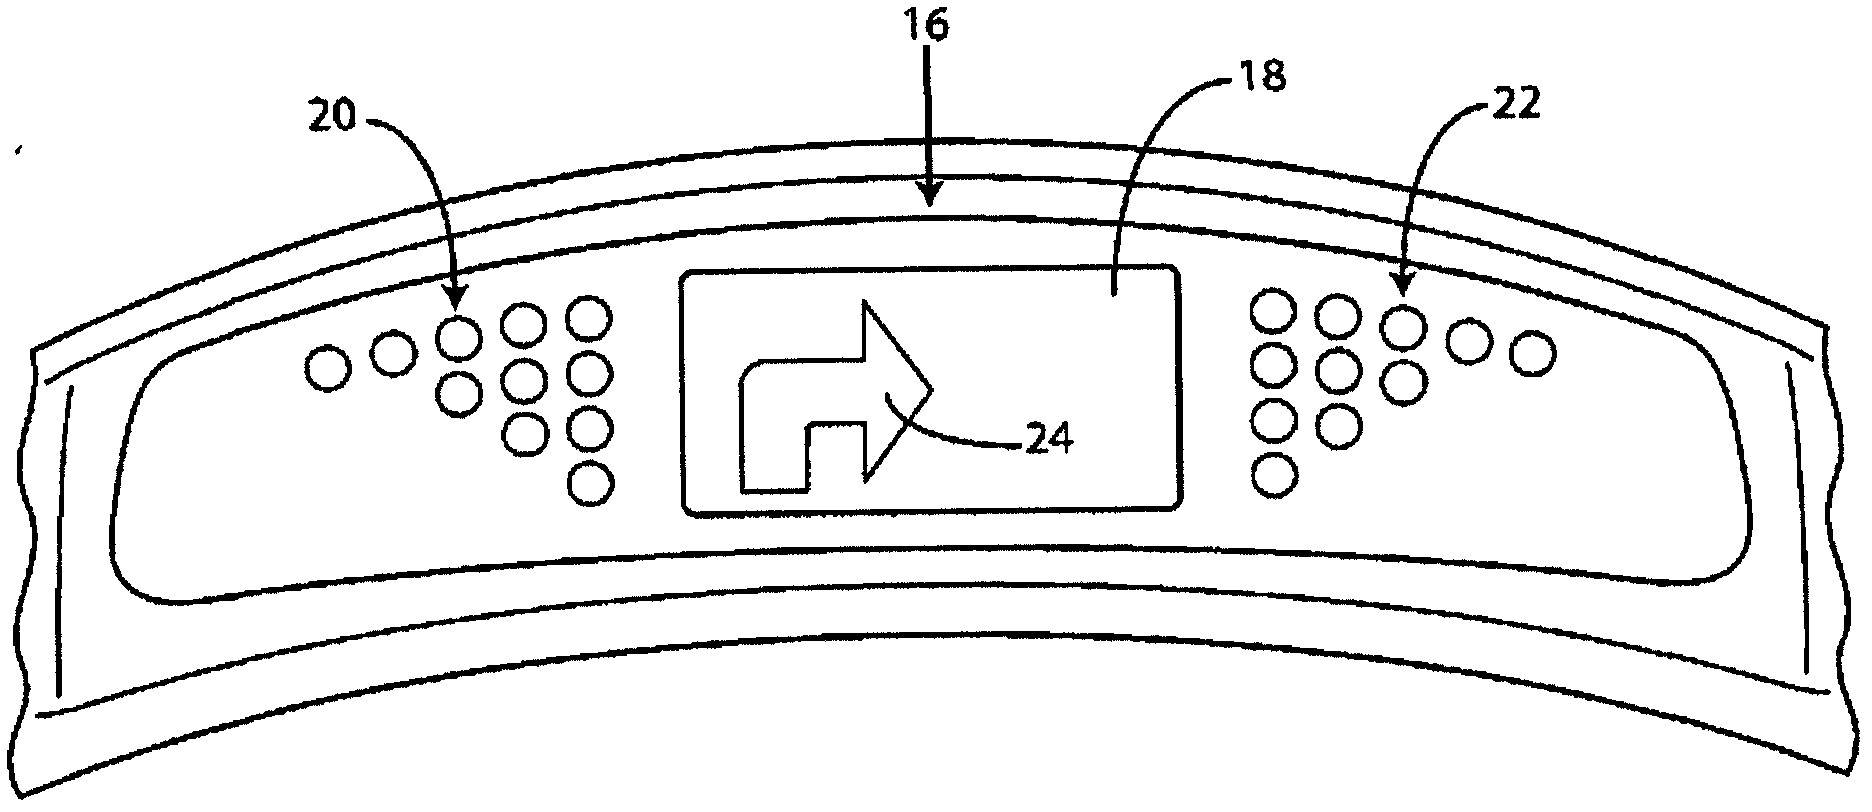 Vehicle driver messaging system and method